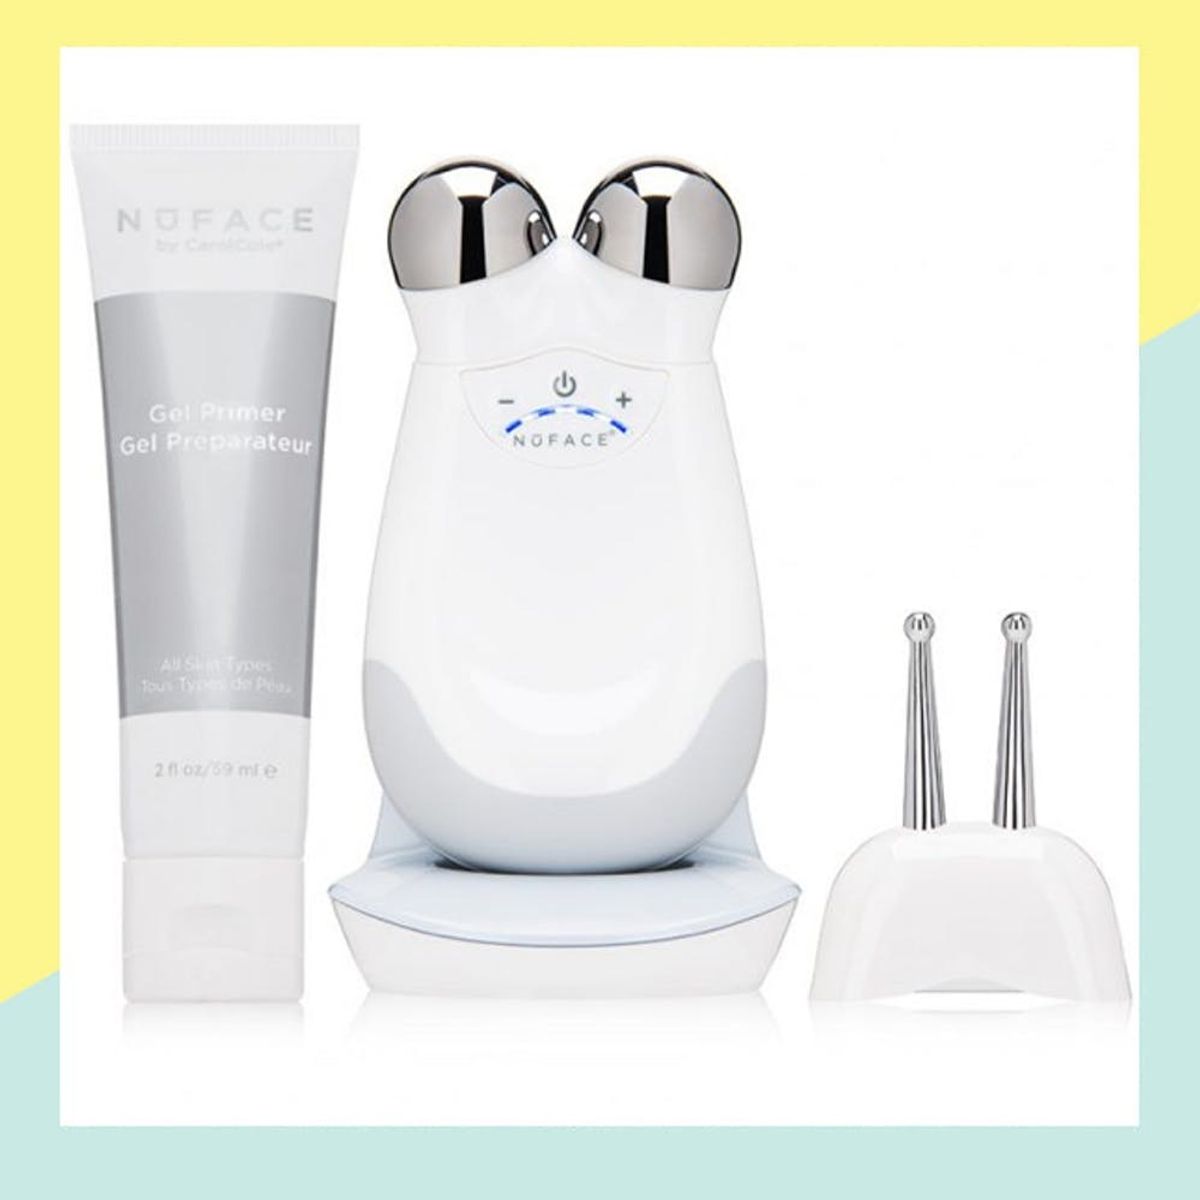 These Fancy Beauty Devices Will Totally Transform Your At-Home Beauty Routine